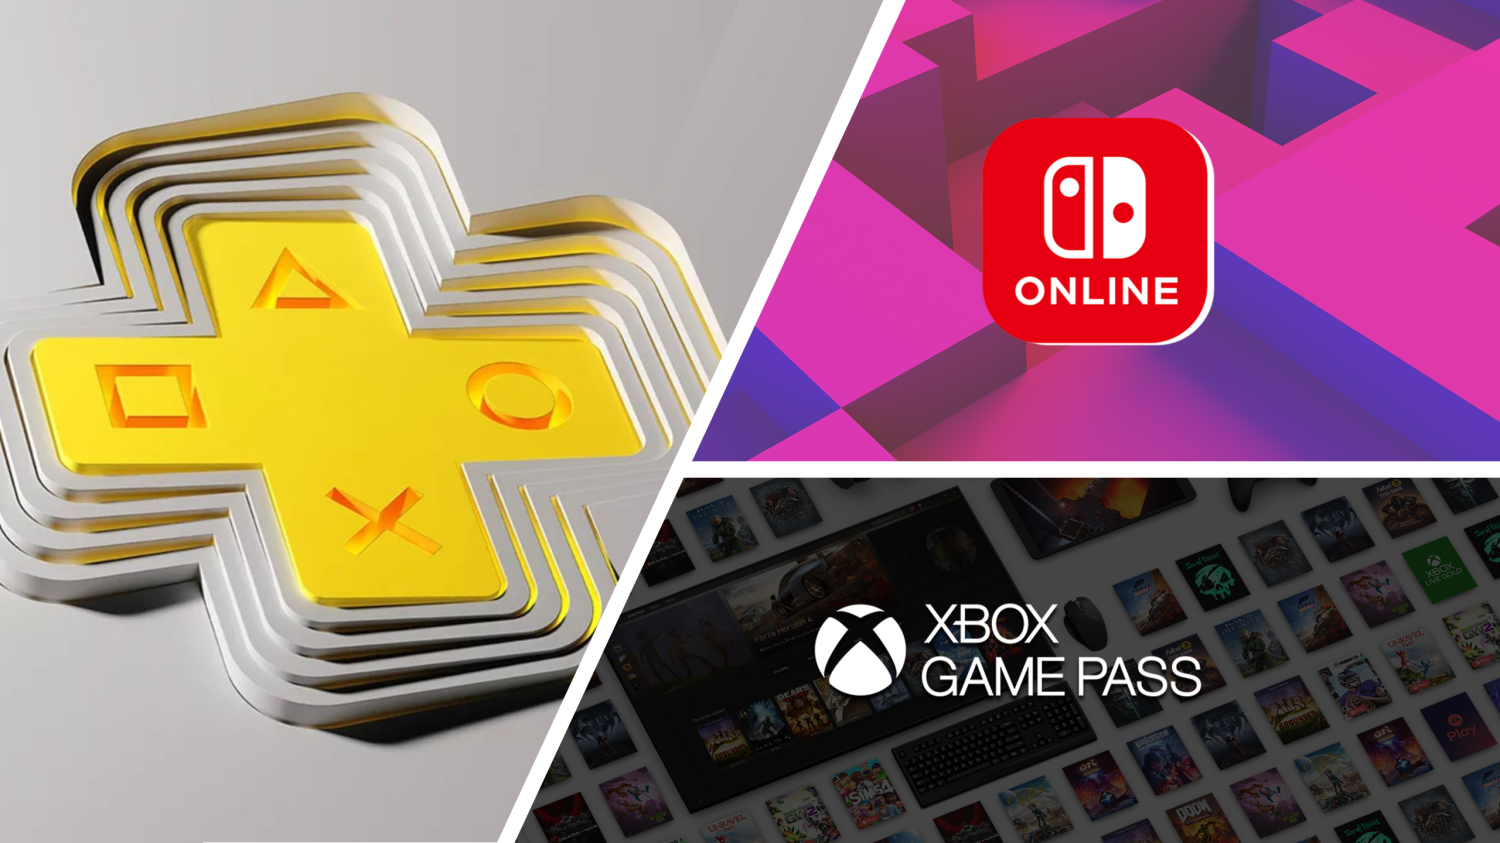 Xbox Game Pass launches a rival to PlayStation Plus